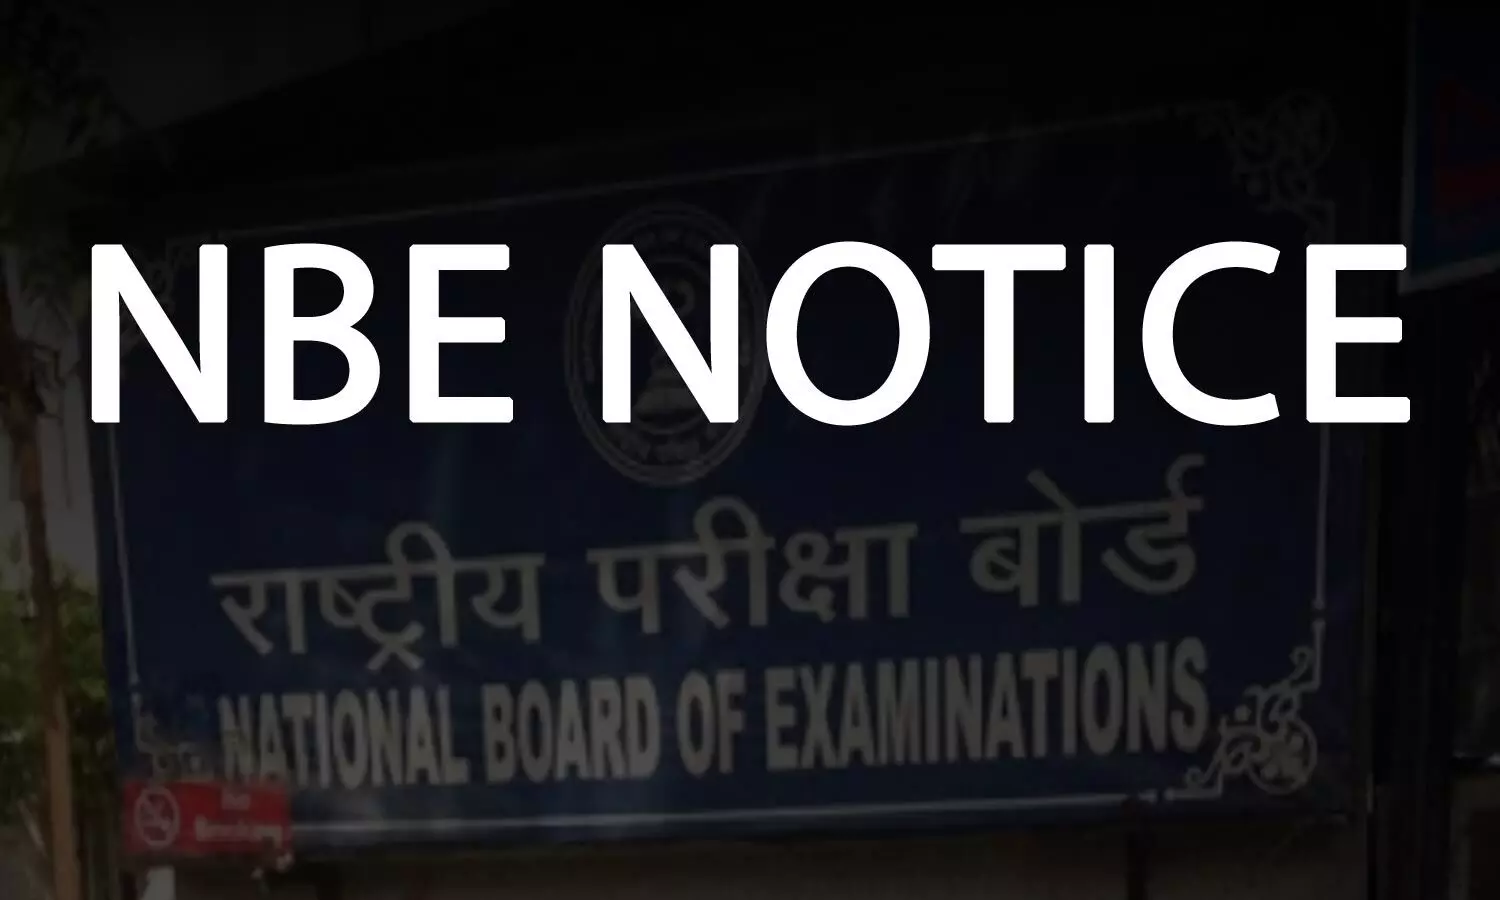 NBE extends deadline for Round 3 Physical Joining, releases Schedule for Final Mop-Up Round